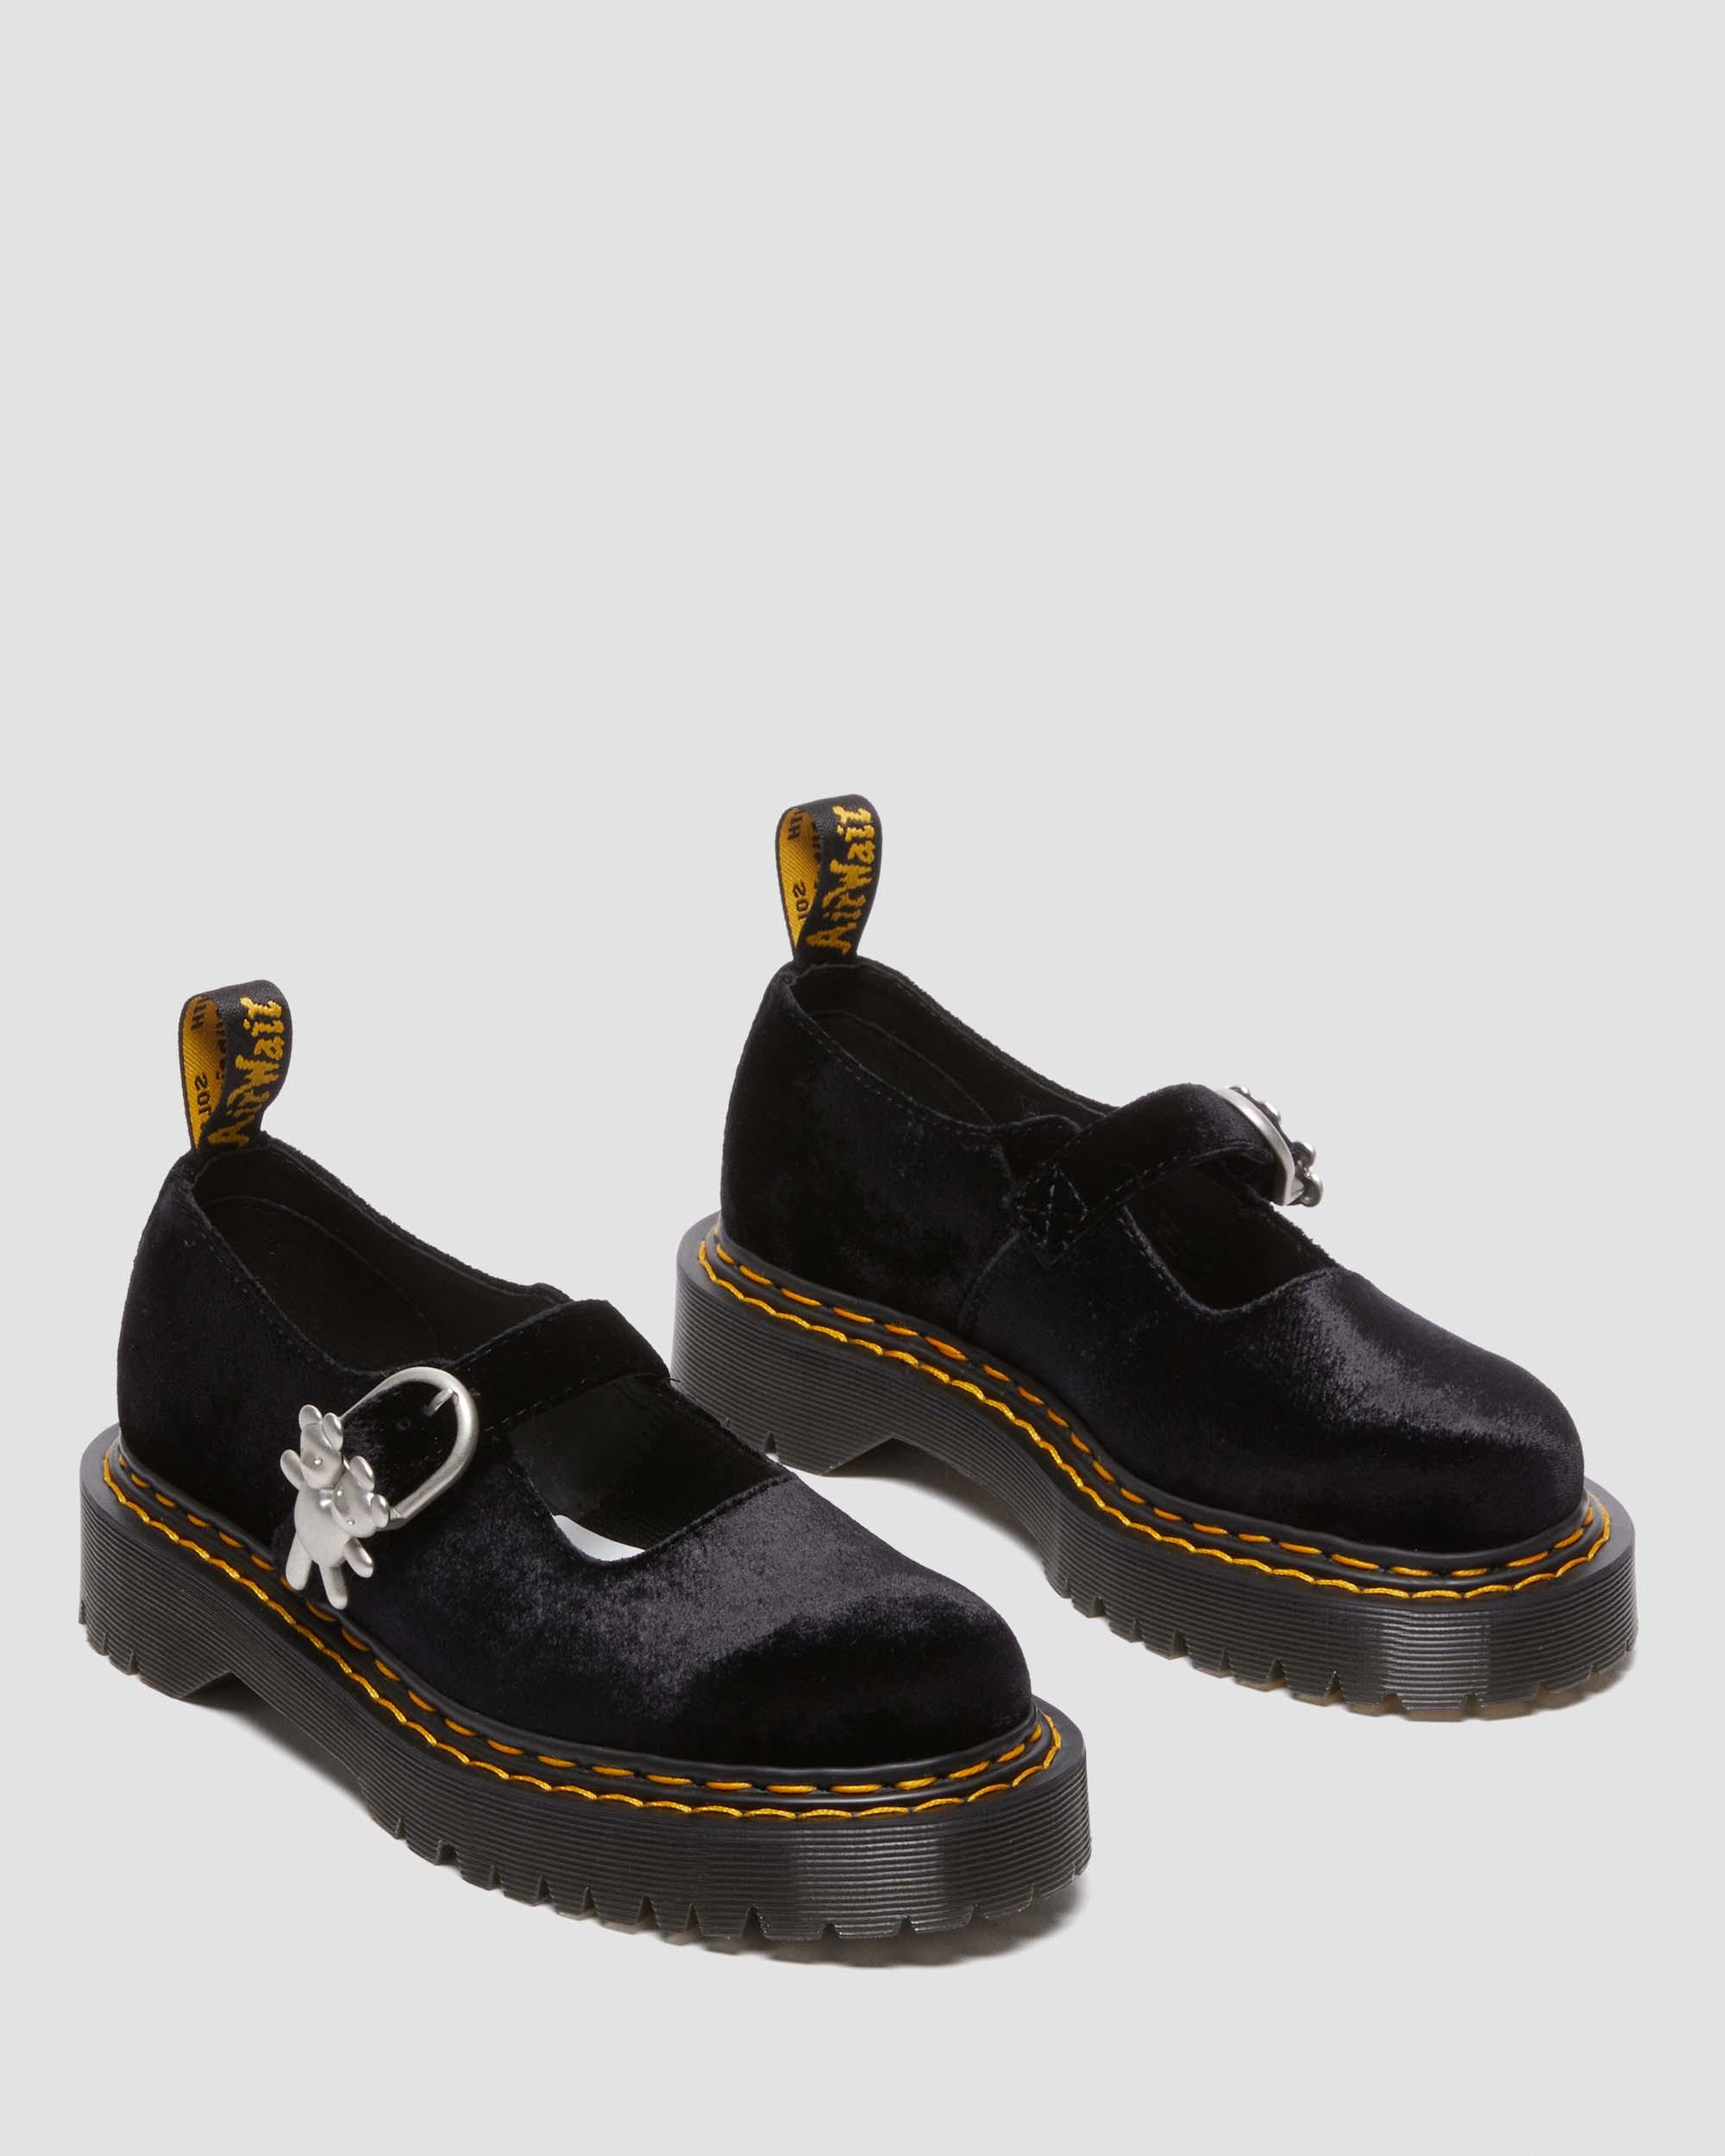 Dr. martens× heaven by Marc jacobs - ローファー/革靴